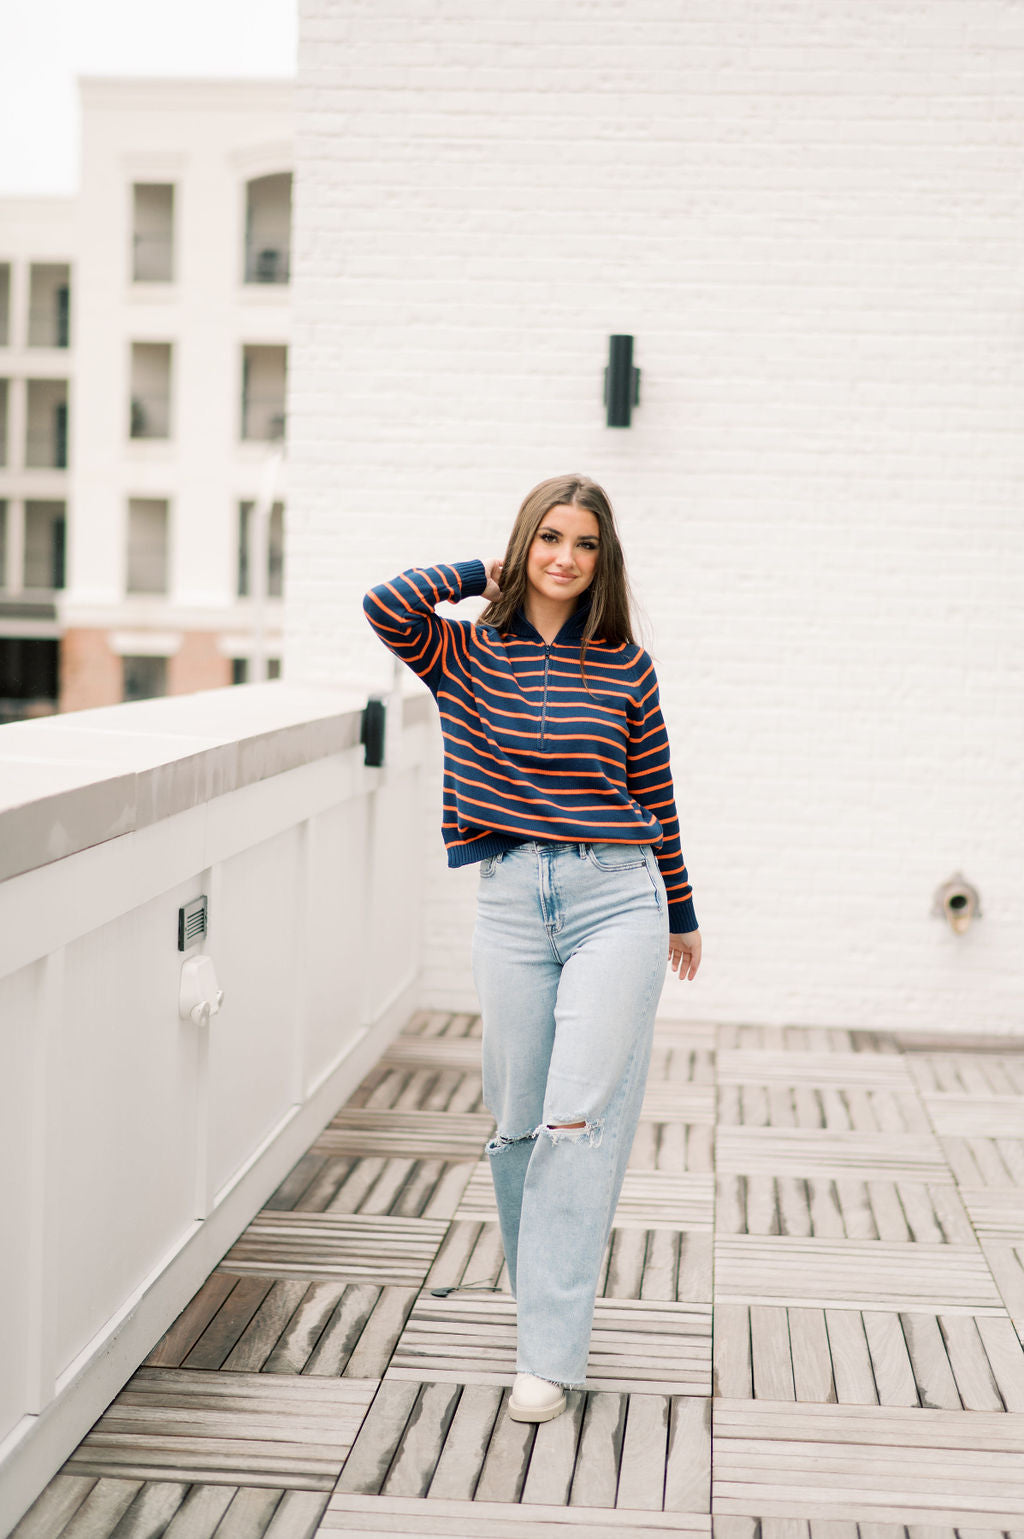 STRIPED SWEATER WITH QUARTER ZIP